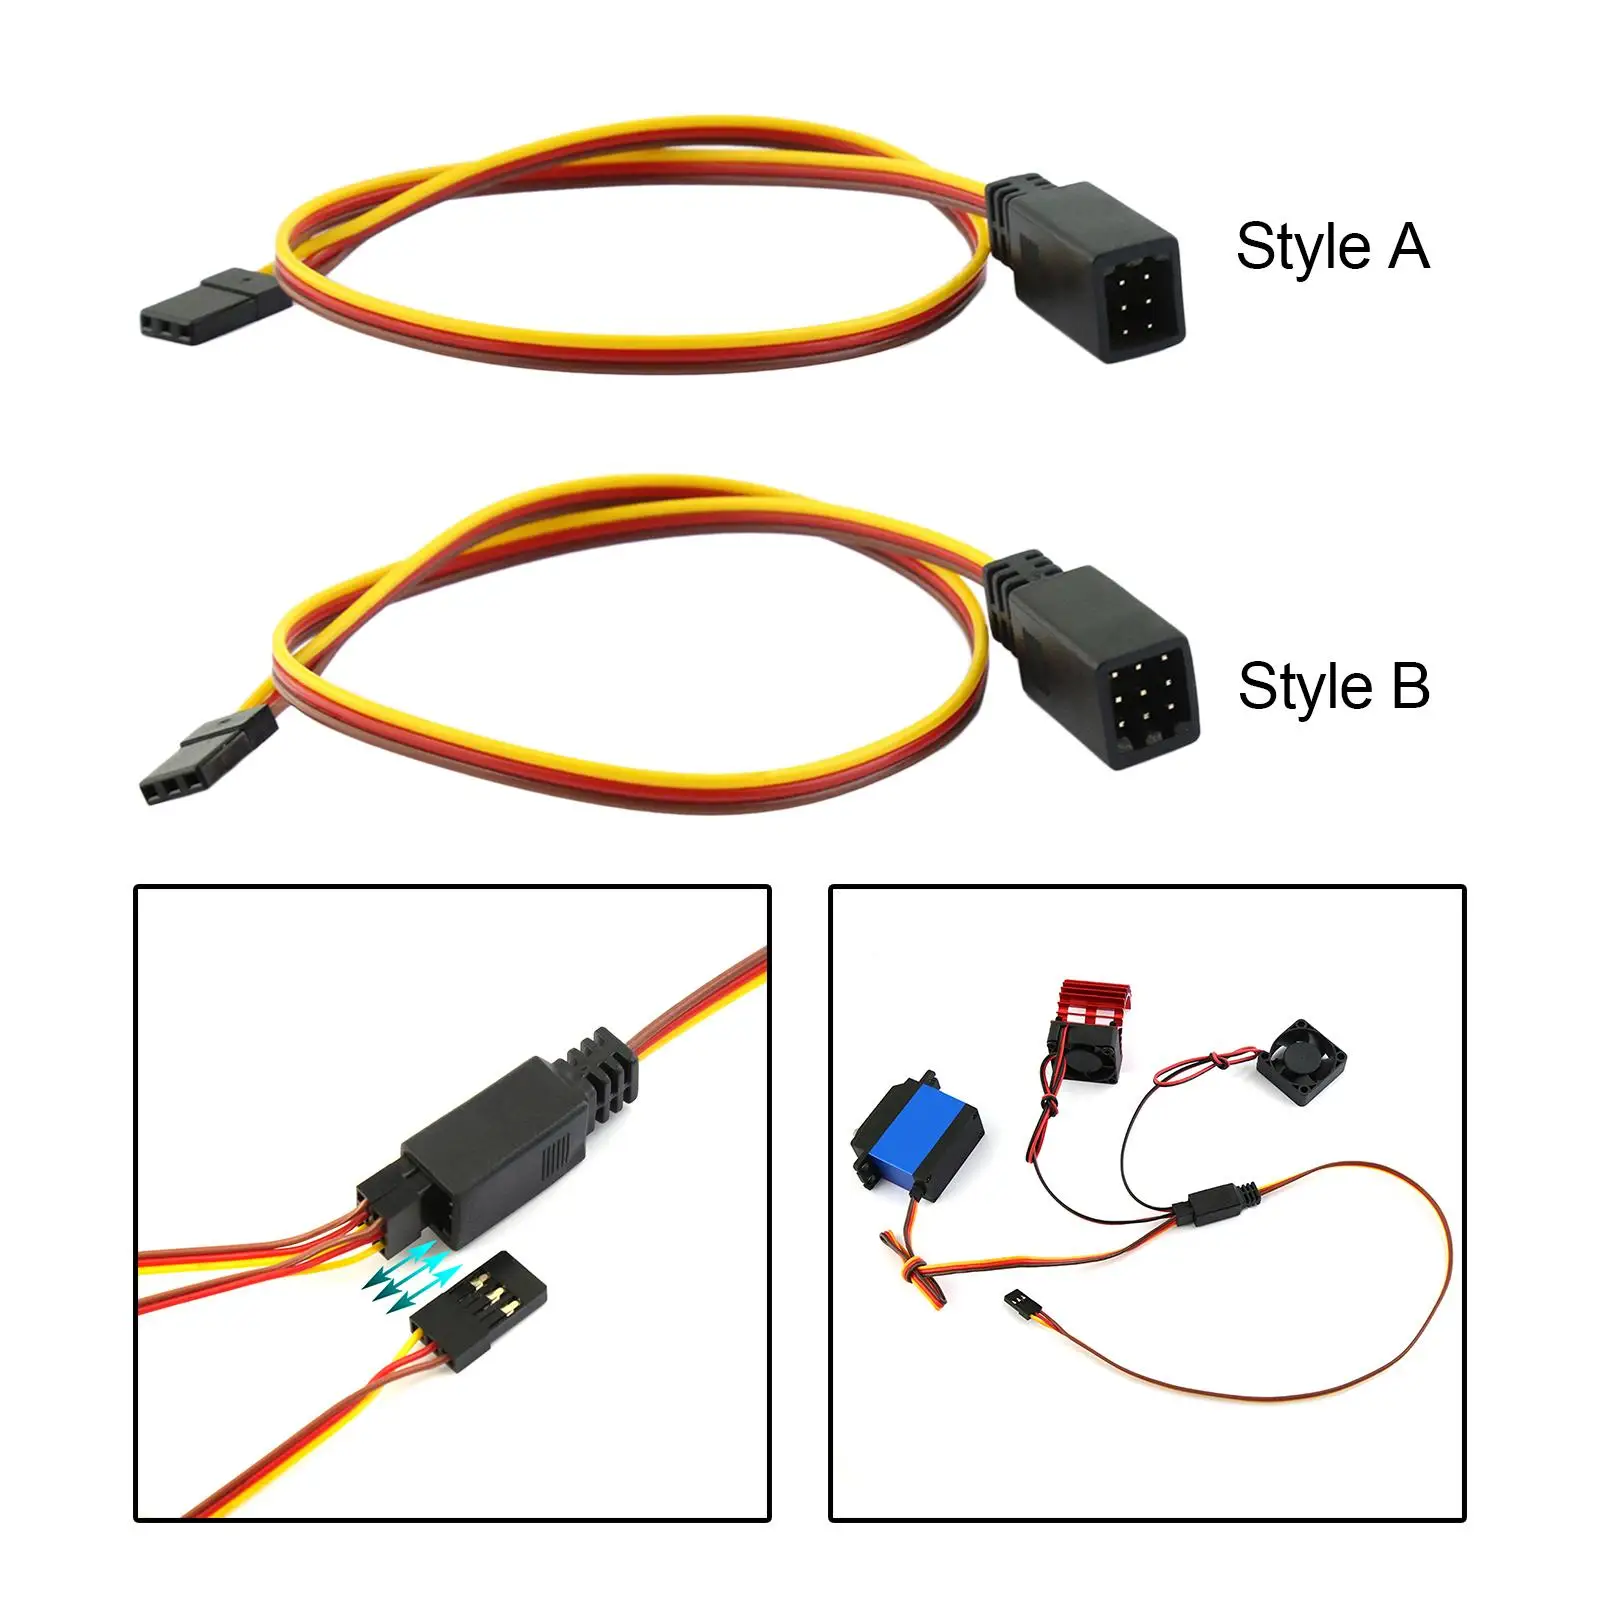 Servo Extension cable Cord JR Connector Harness Leads Splitter Cable for RC Car Remote Control Toys